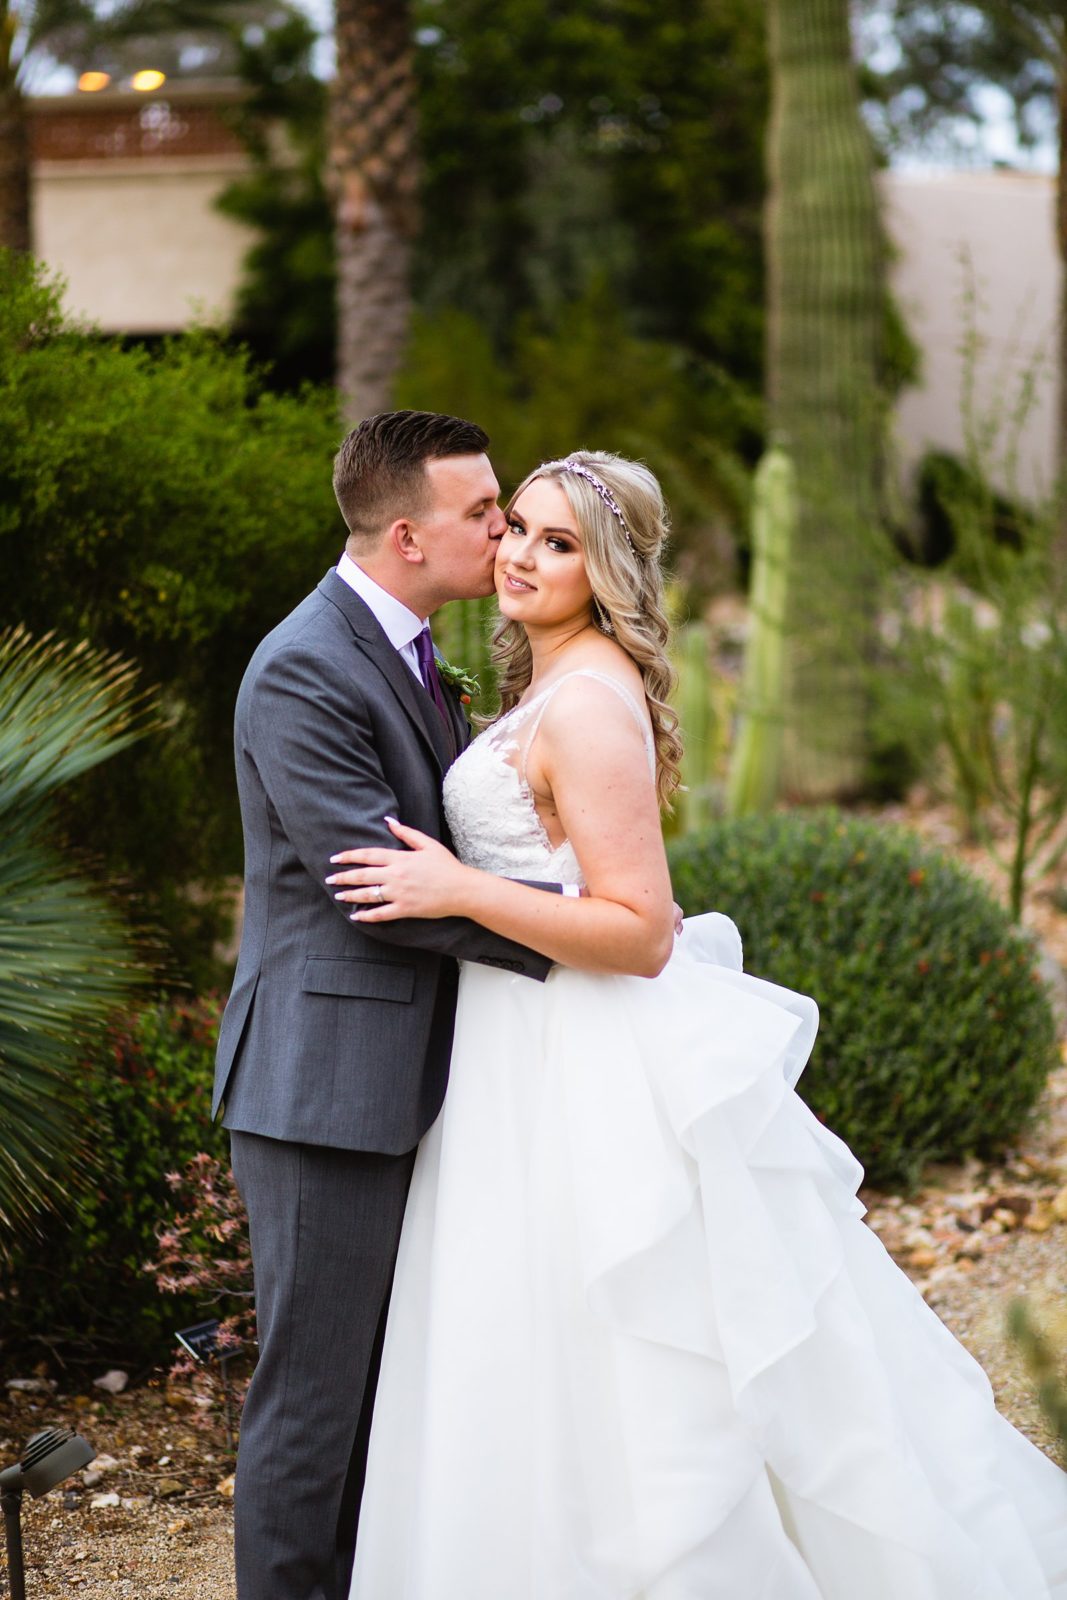 Bride and Groom share a kiss during their The Scottsdale Resort at McCormick Ranch wedding by Scottsdale wedding photographer PMA Photography.